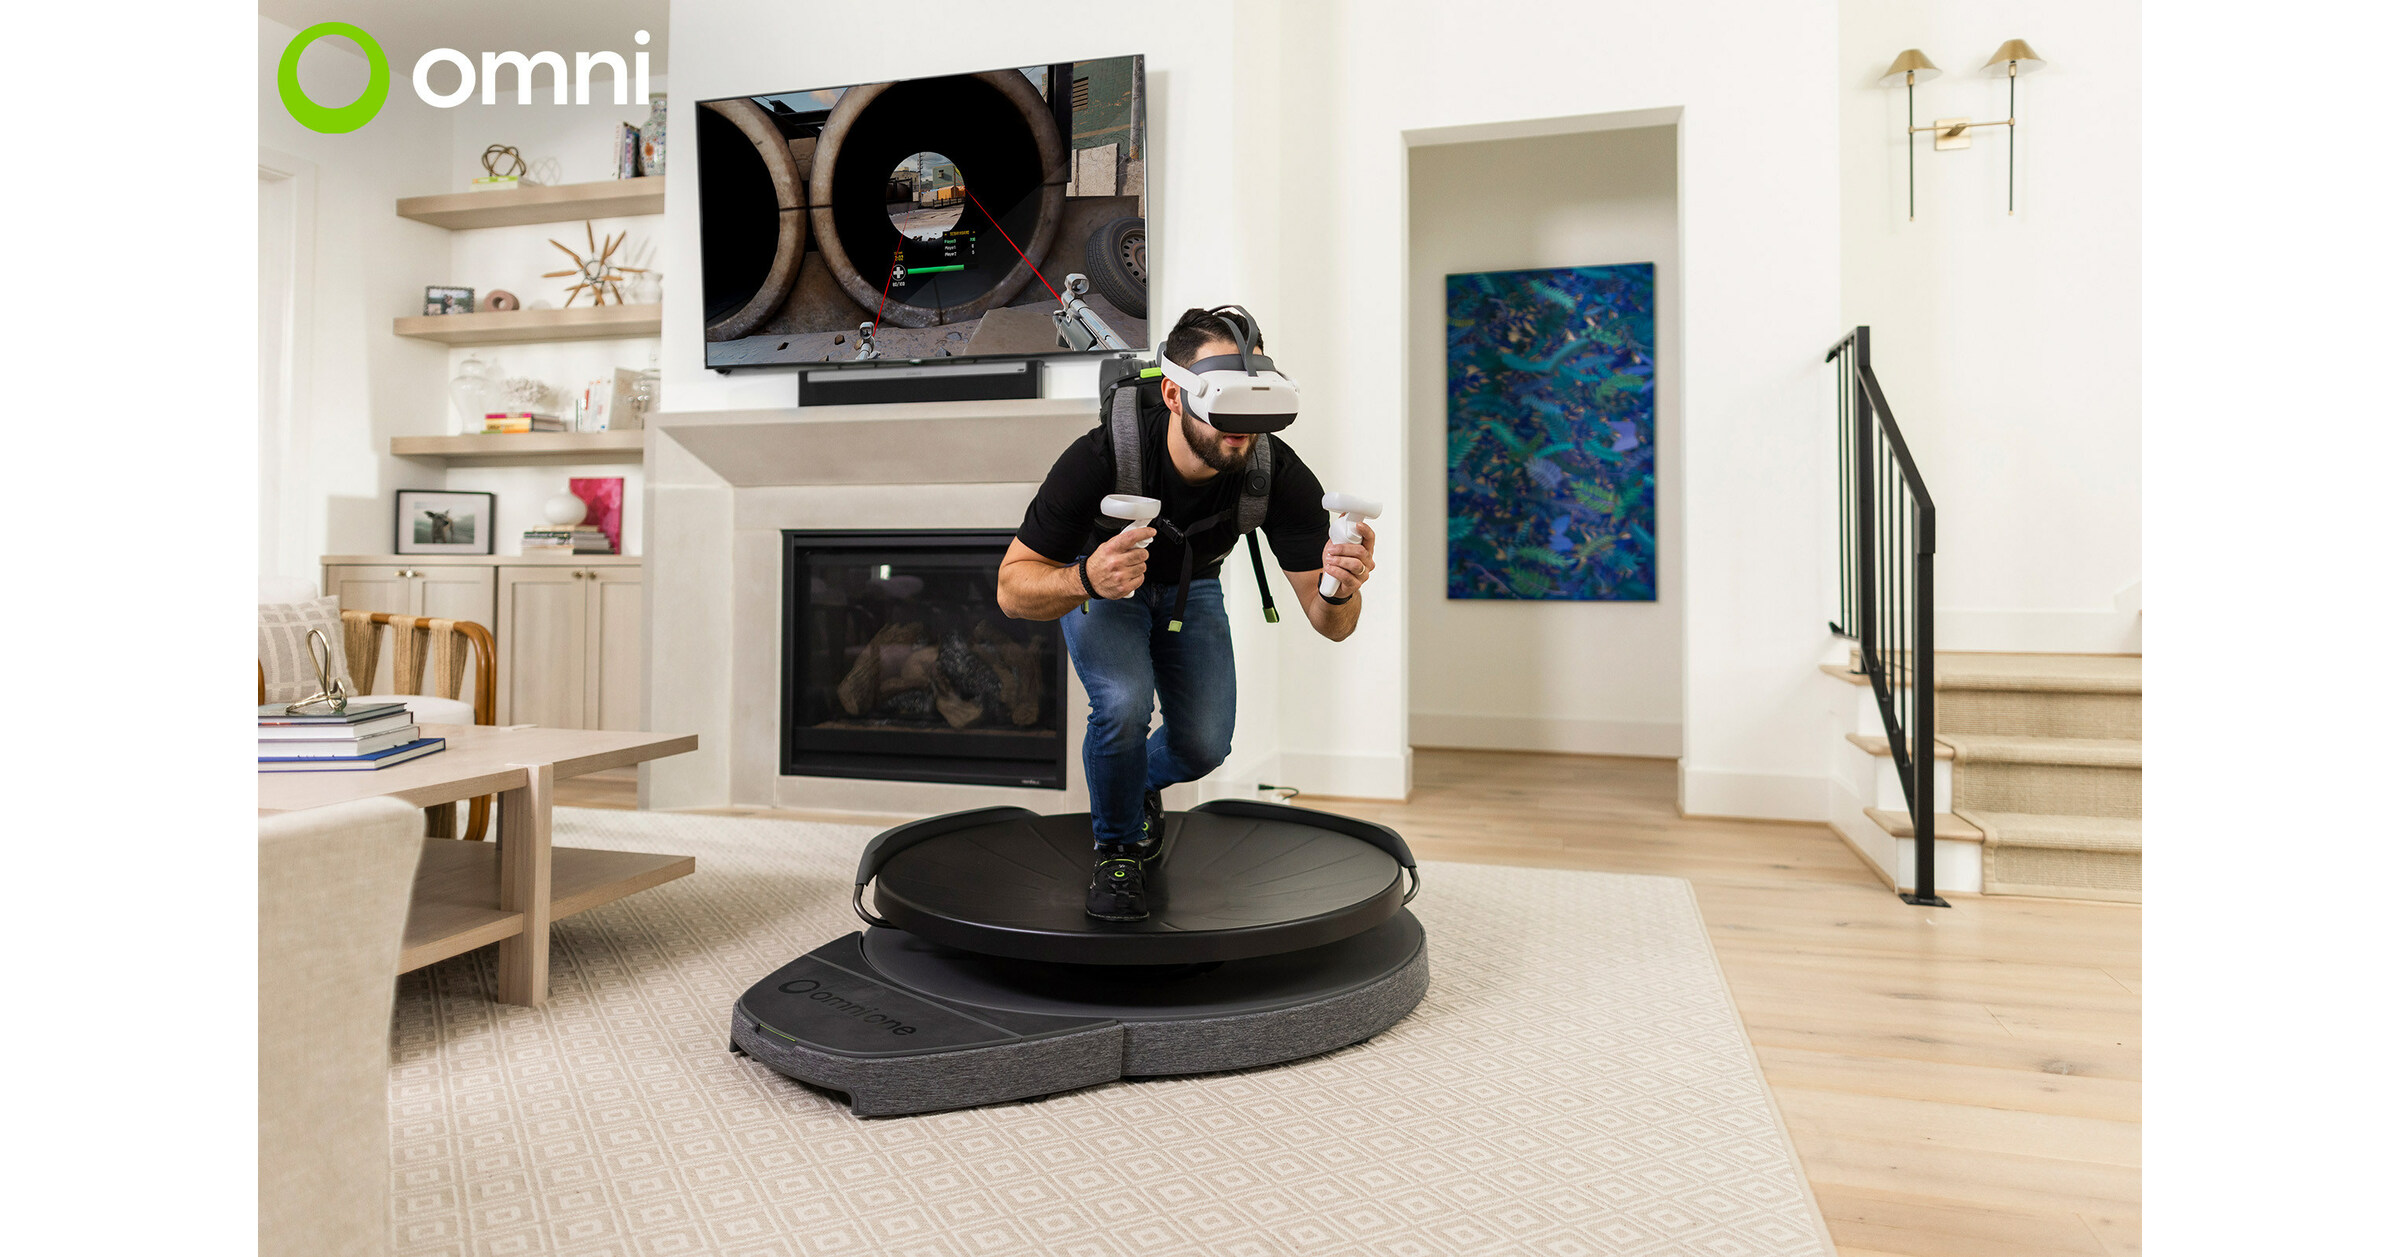 scramble i dag Deltage Explore Virtual Reality Worlds at Home: Virtuix Launches Omni One, a Unique  Omni-Directional Treadmill for Consumers That Lets You Step into VR Without  Boundaries